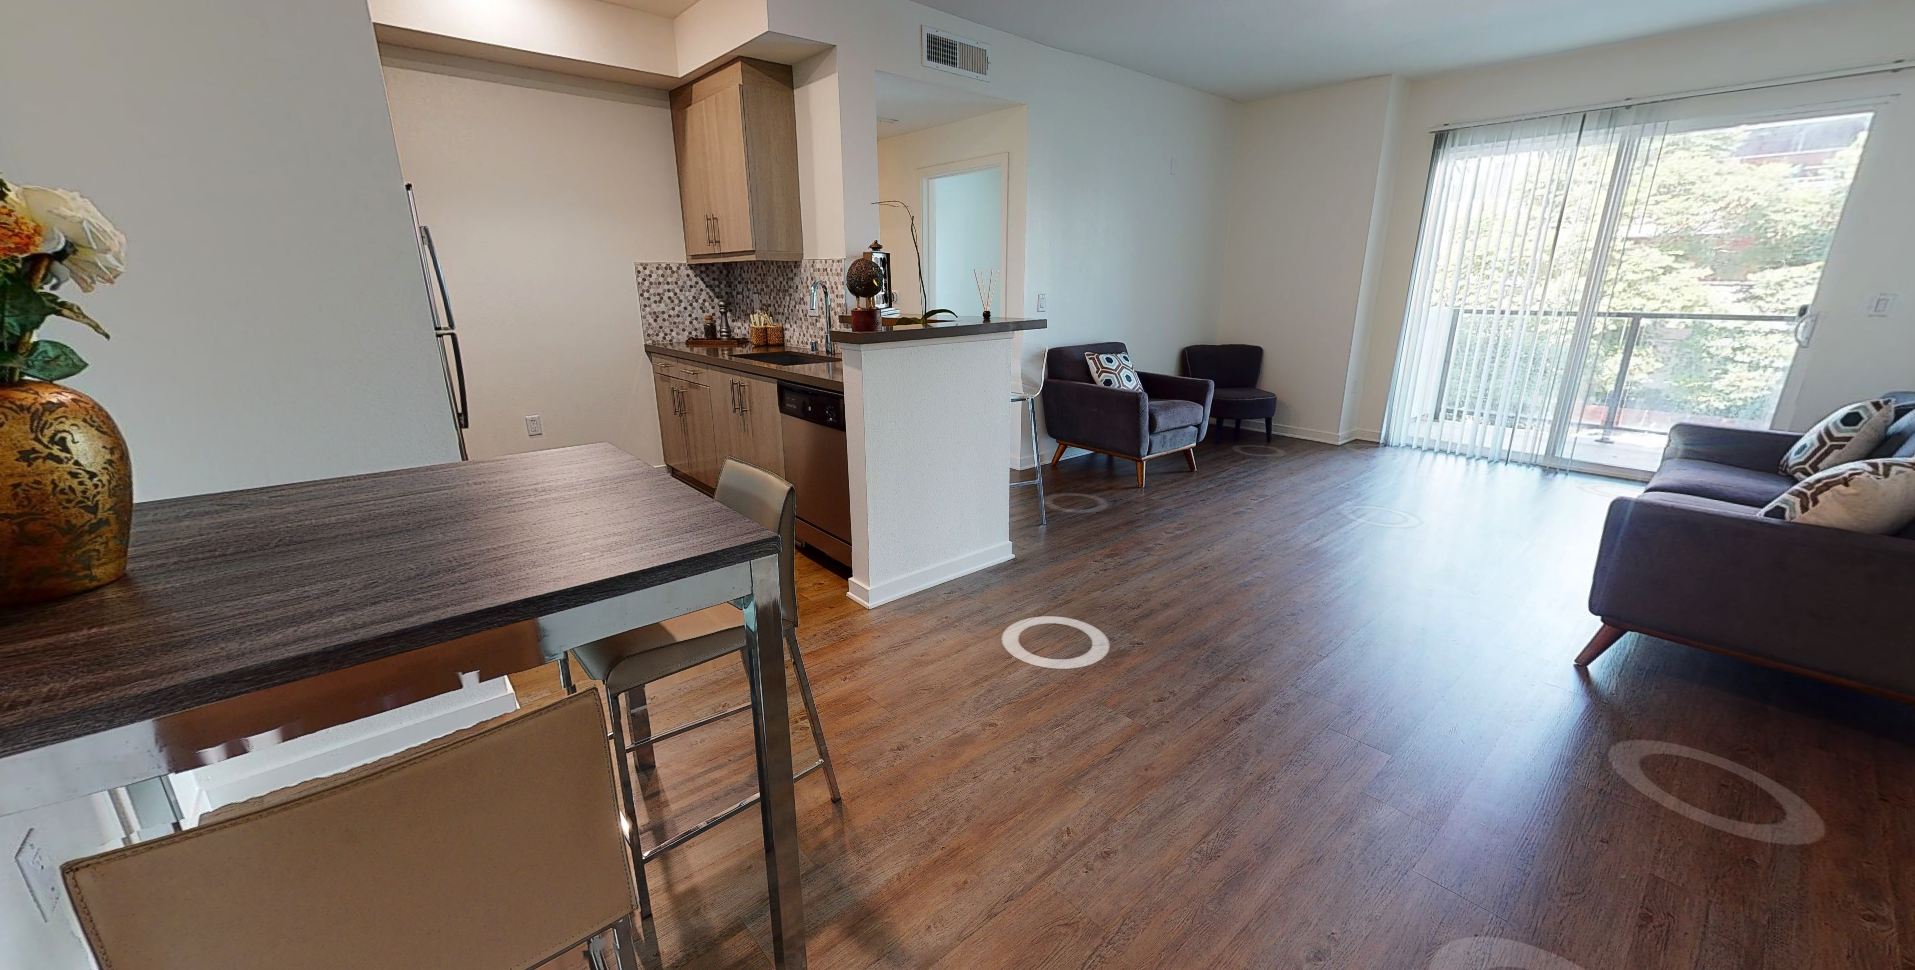 Virtual Tour of Apartment at Vues on Gordon Apartment Homes in Hollywood California